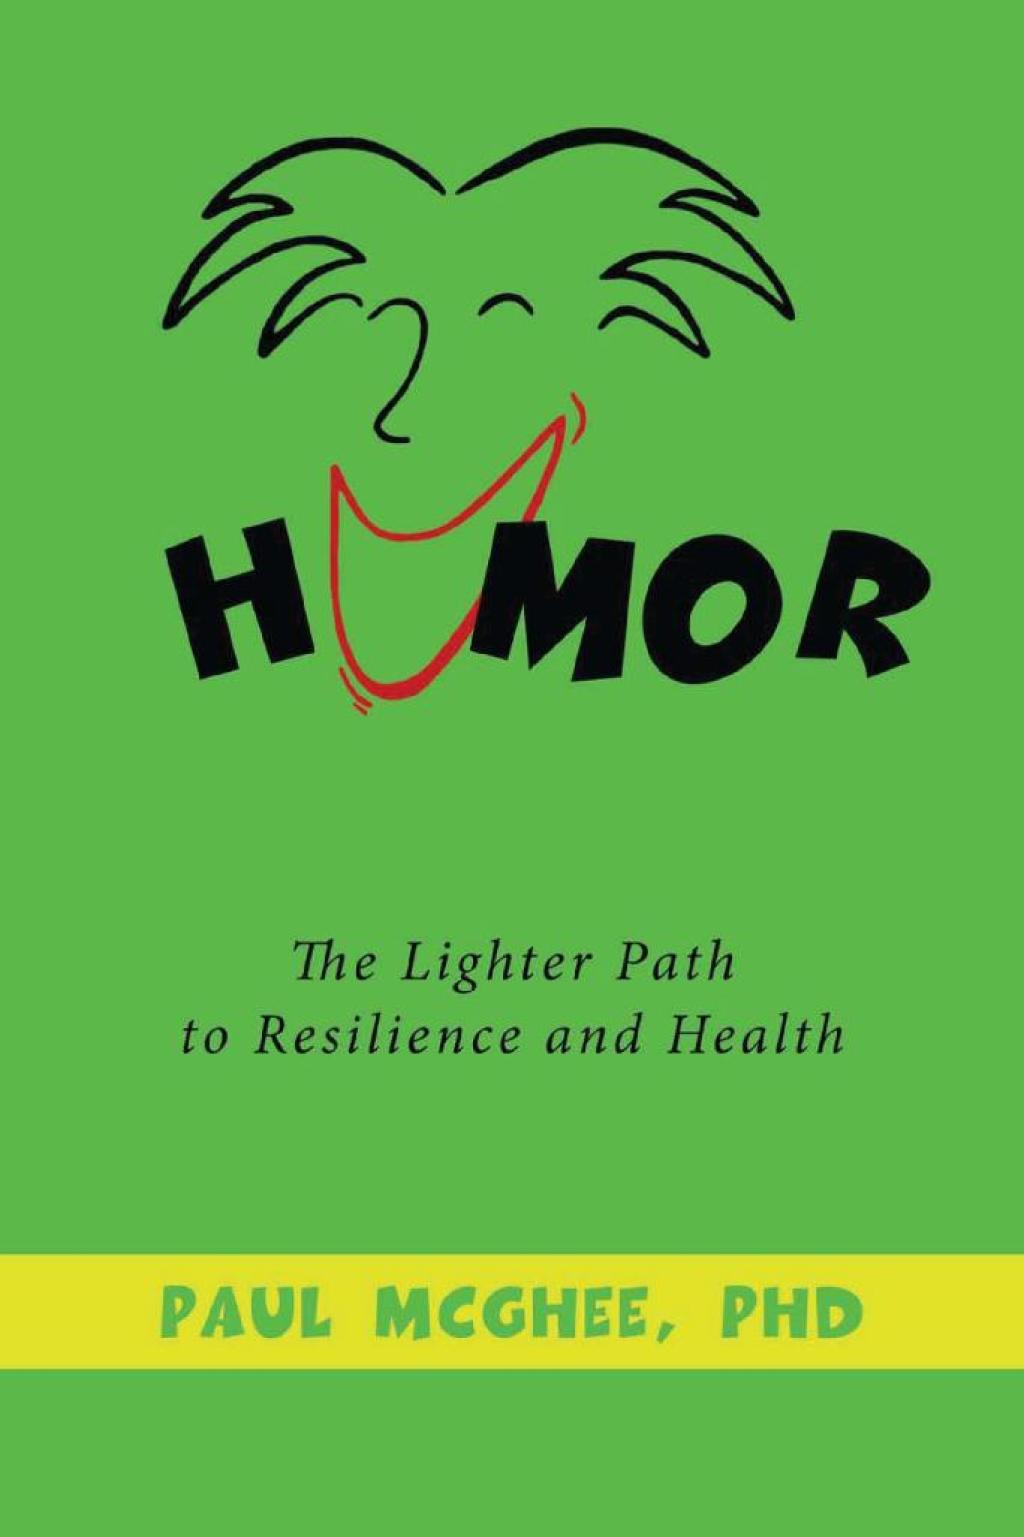 Reflowable Humor the Lighter Path to Resilience and Health